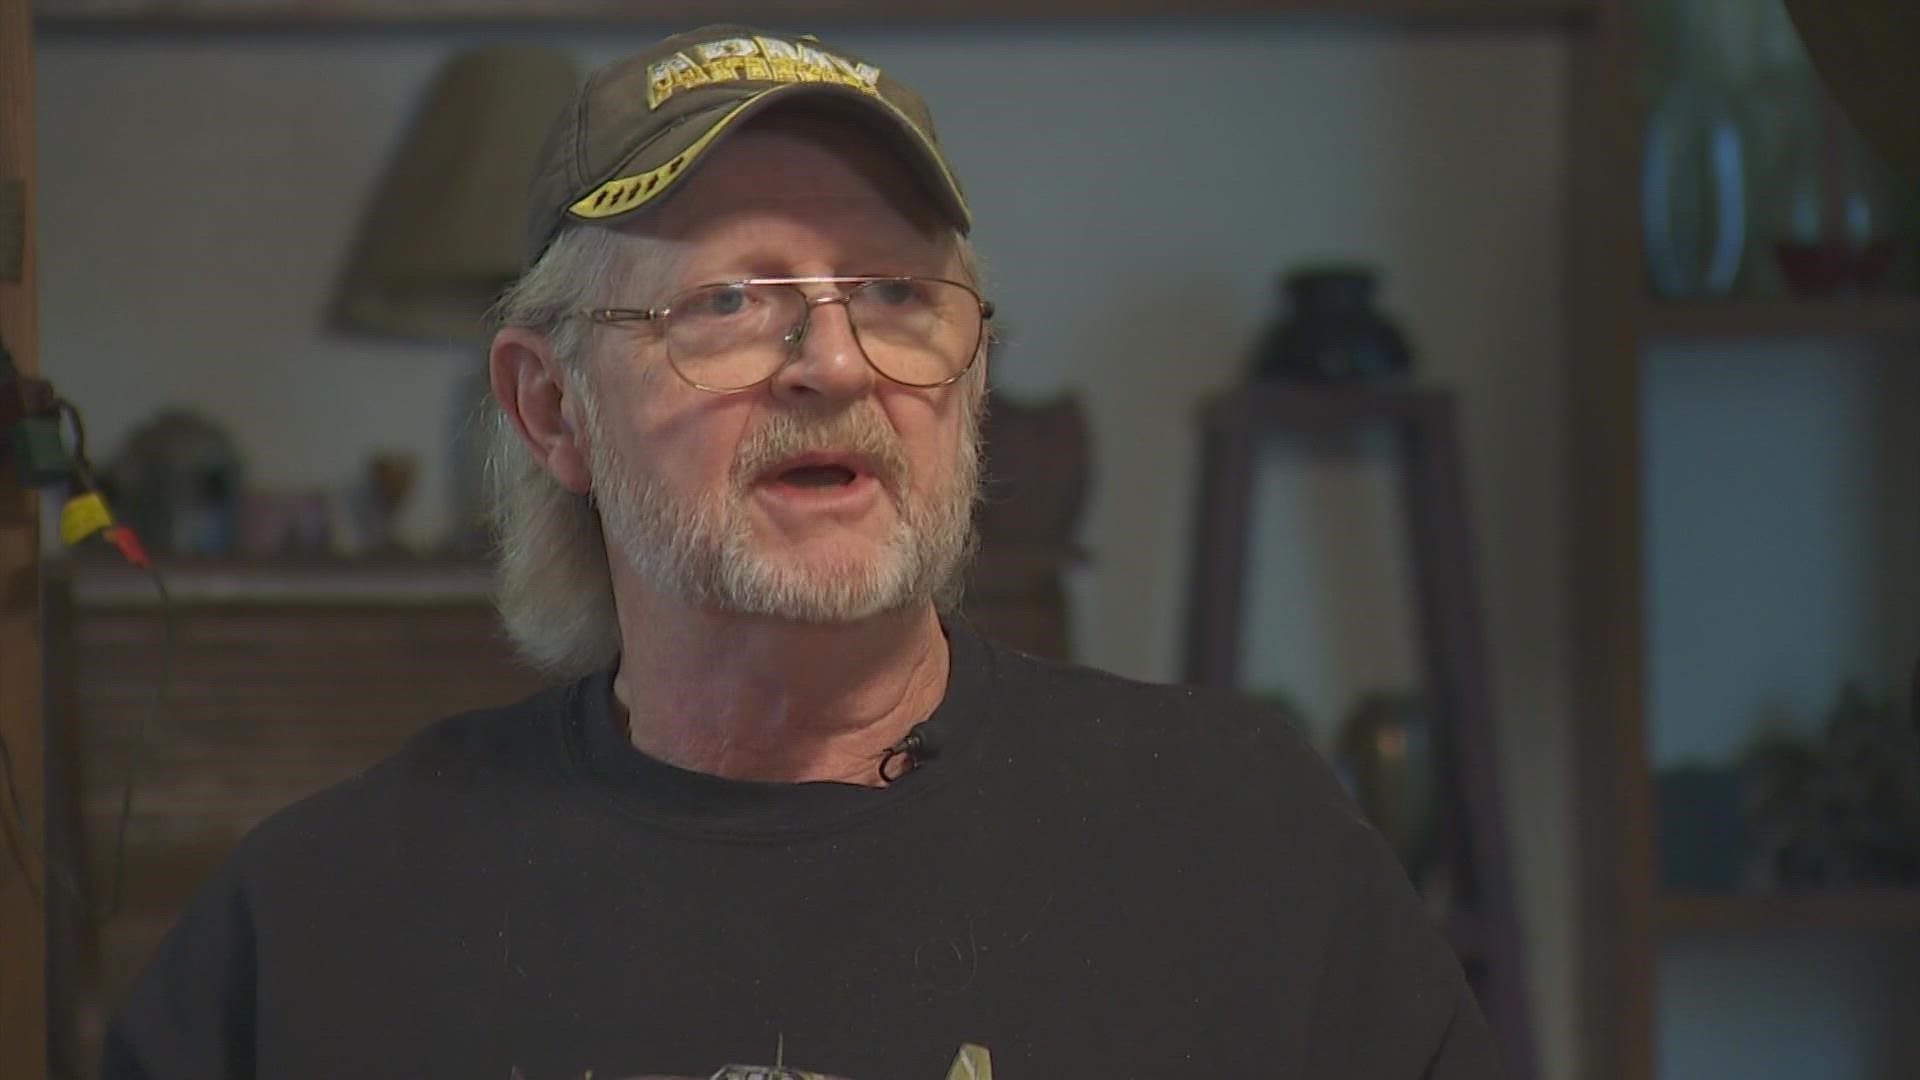 A 66-year-old Amazon driver was injured when he attempted to stop his truck from being stolen.